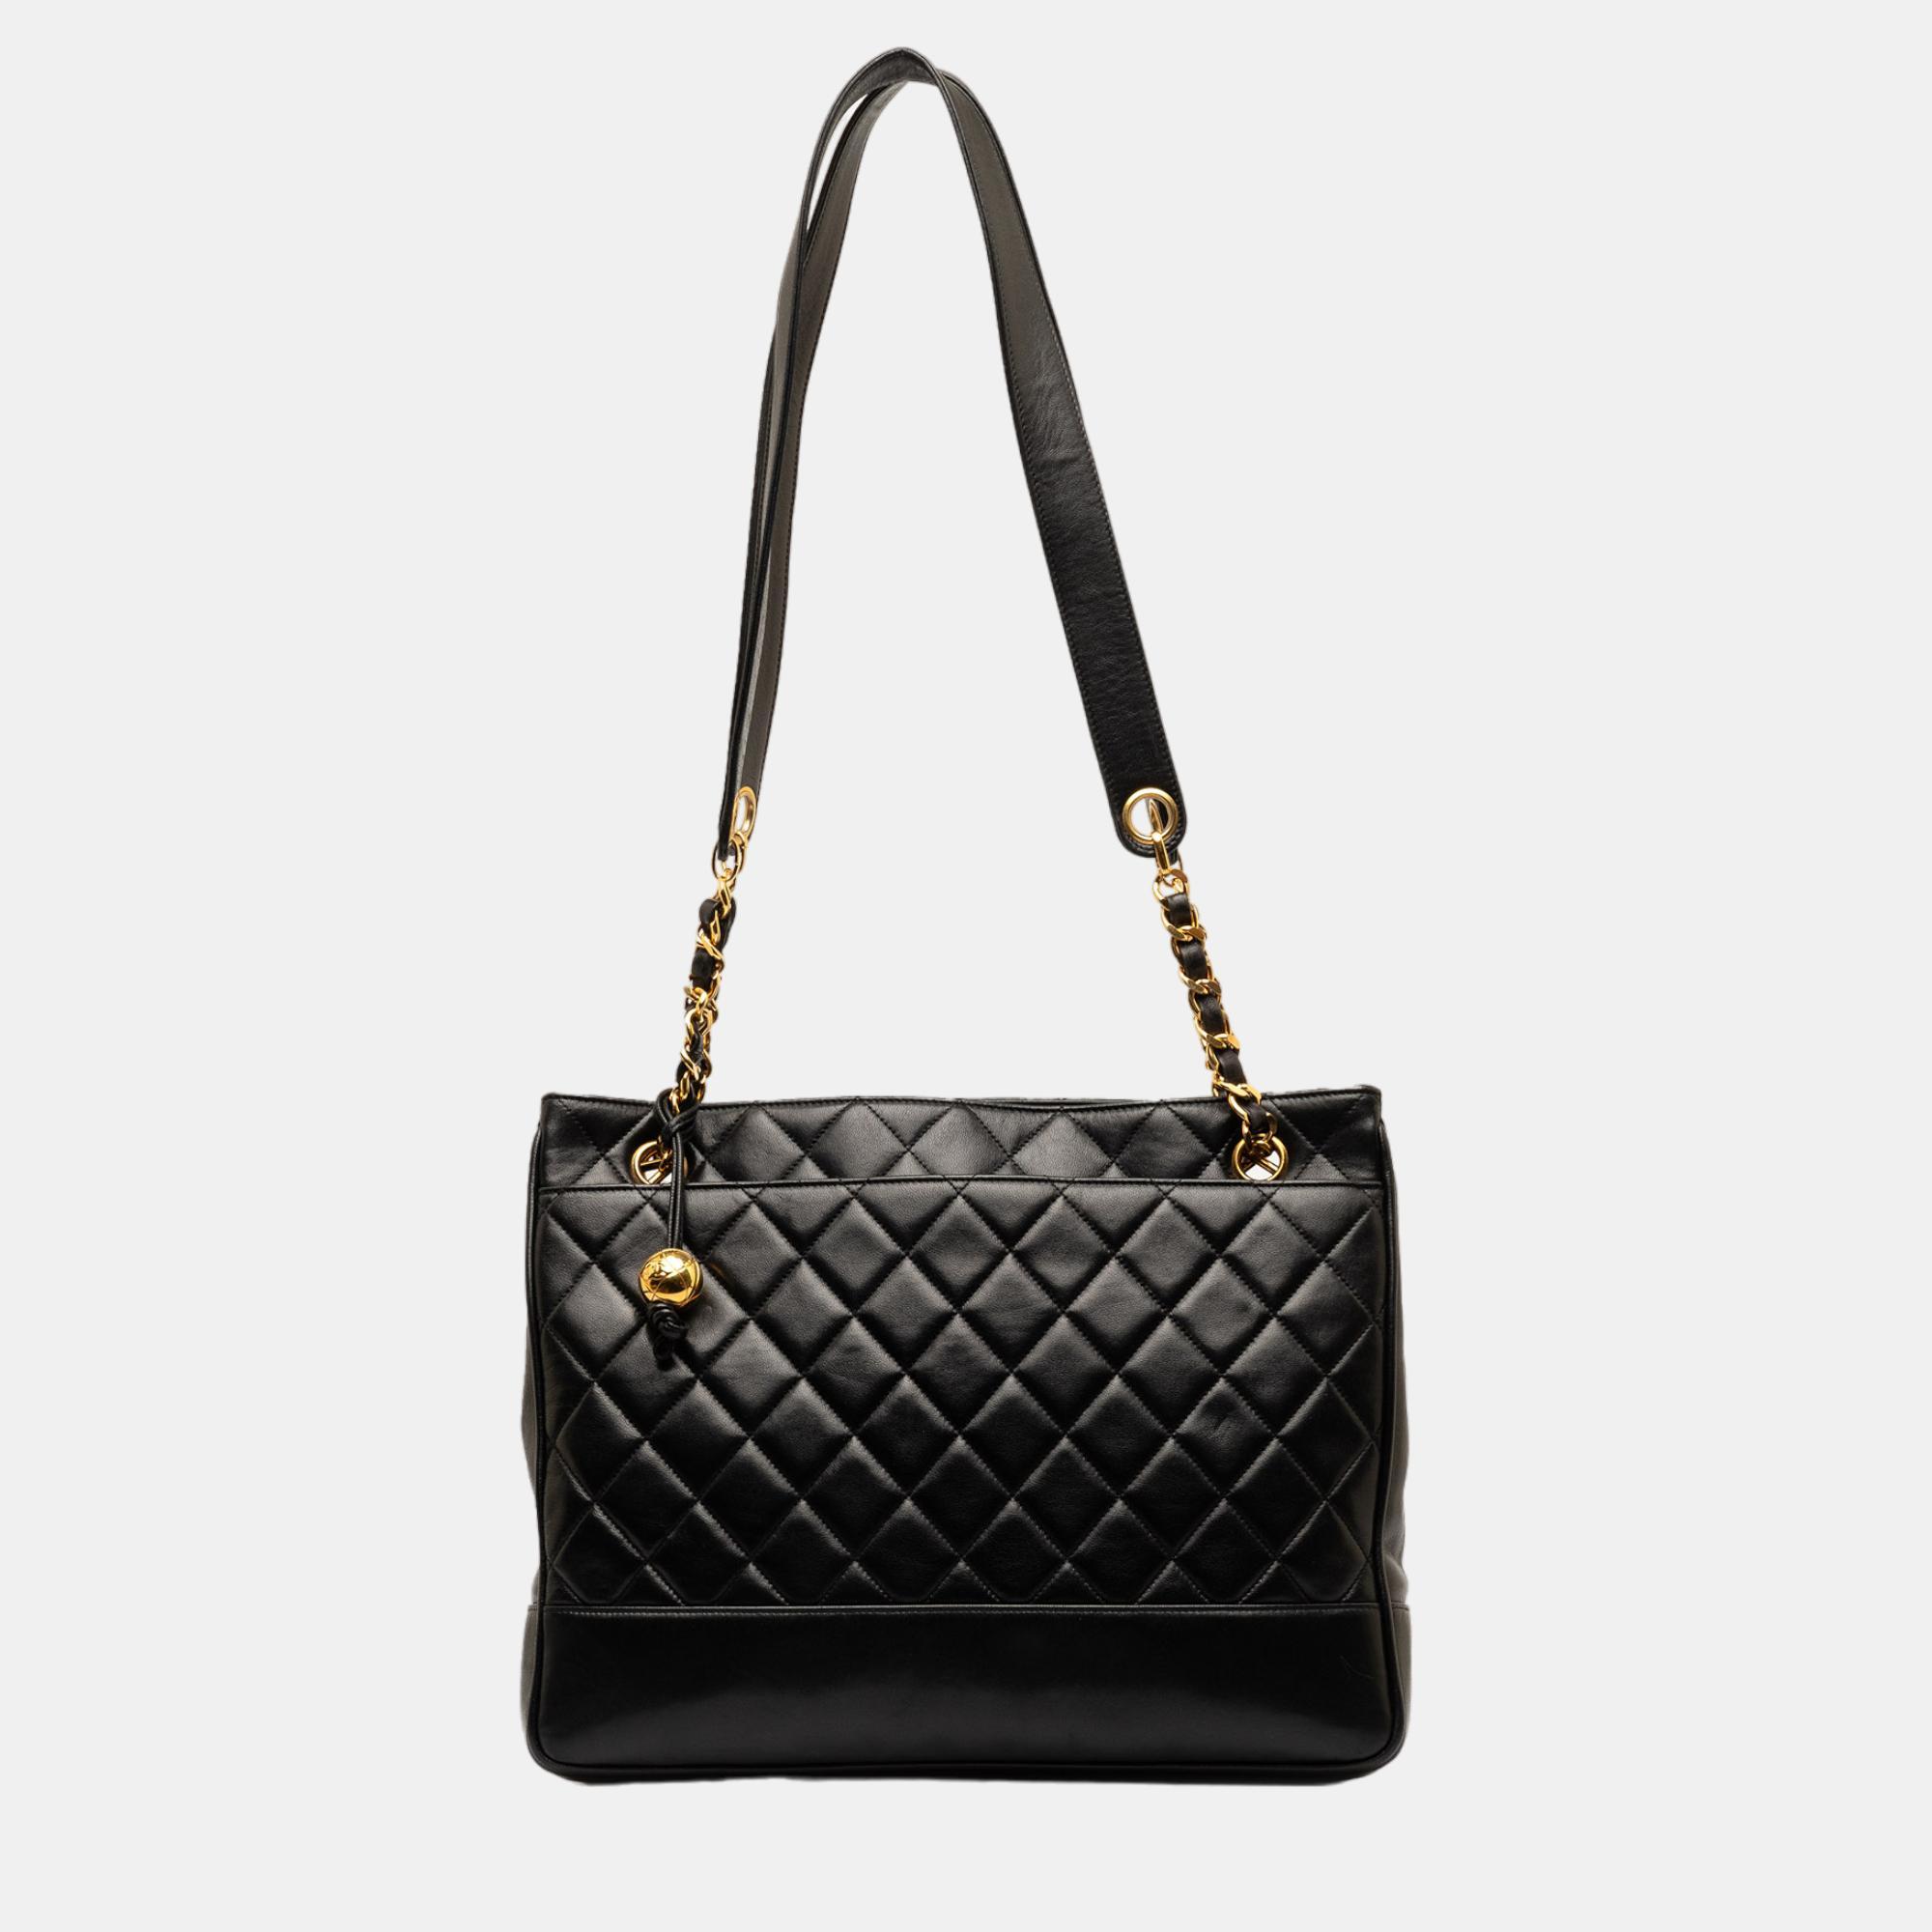 Chanel black quilted lambskin tote